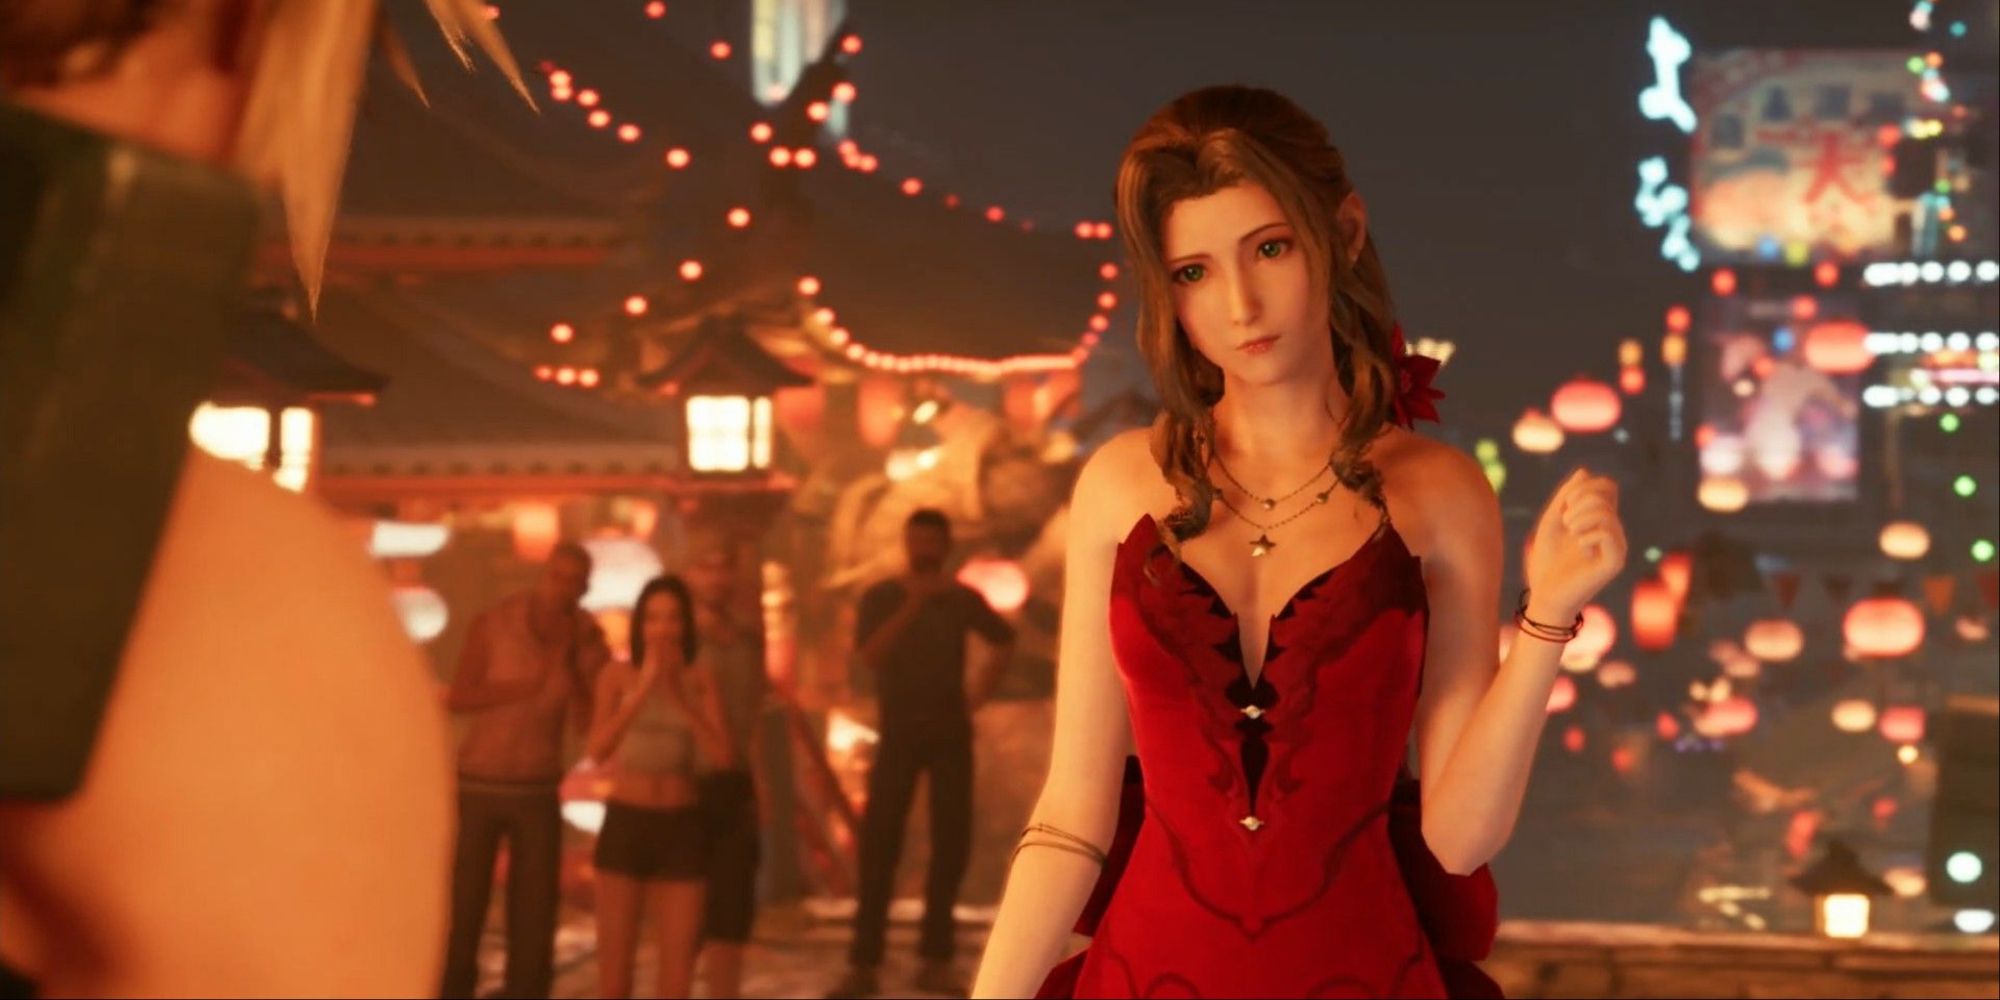 Final Fantasy 7 Remake - Aerith in her red dress